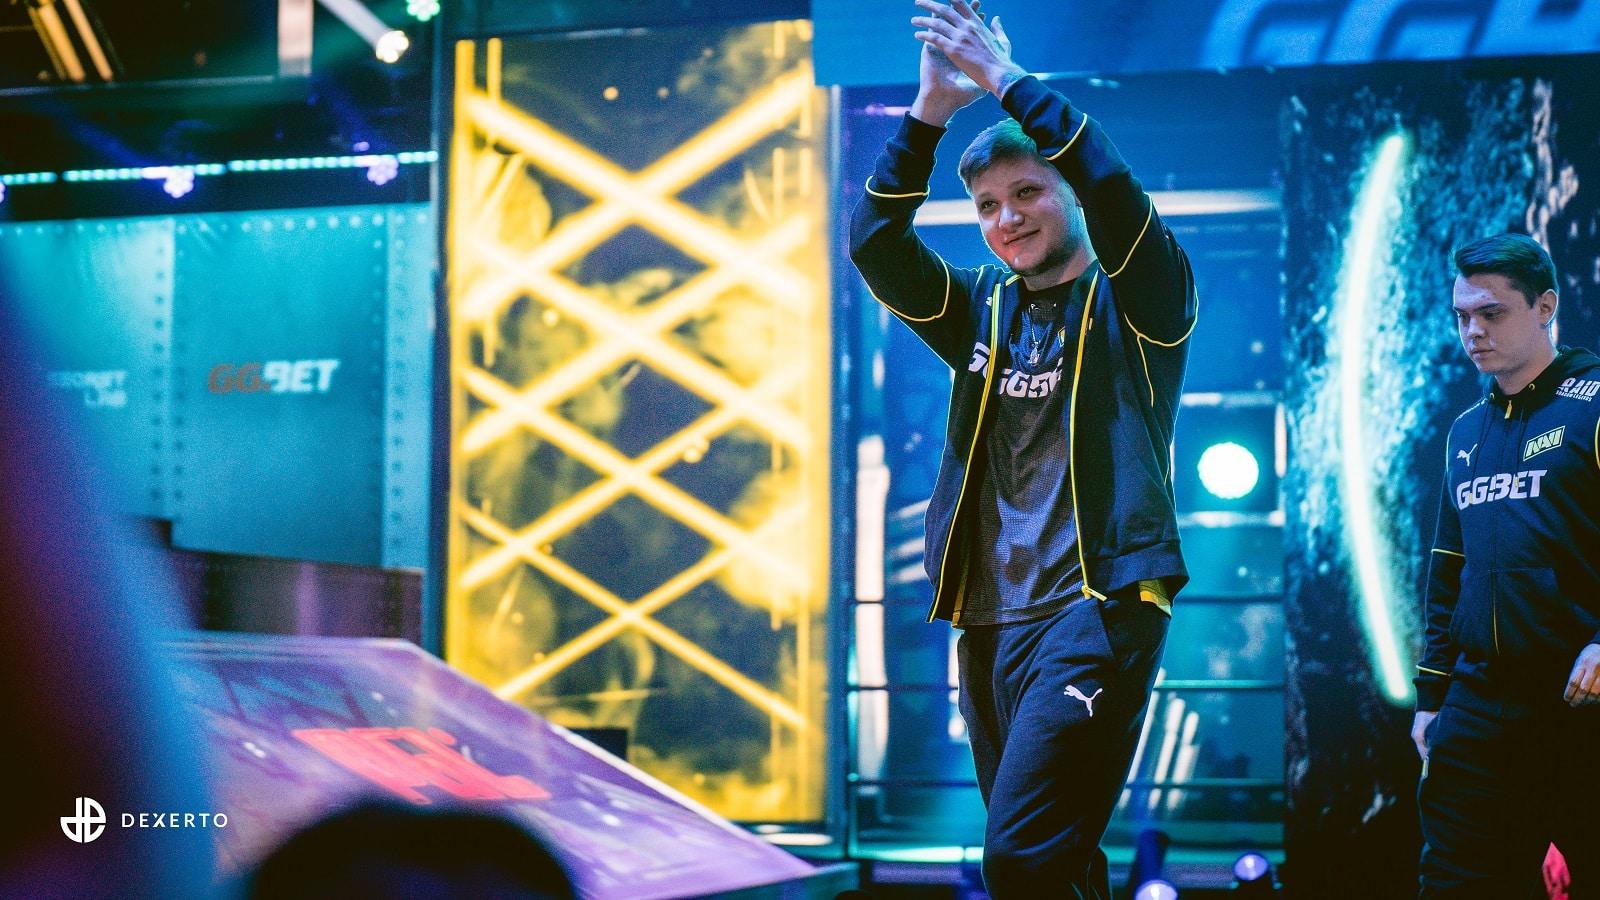 s1mple raising his hands and clapping